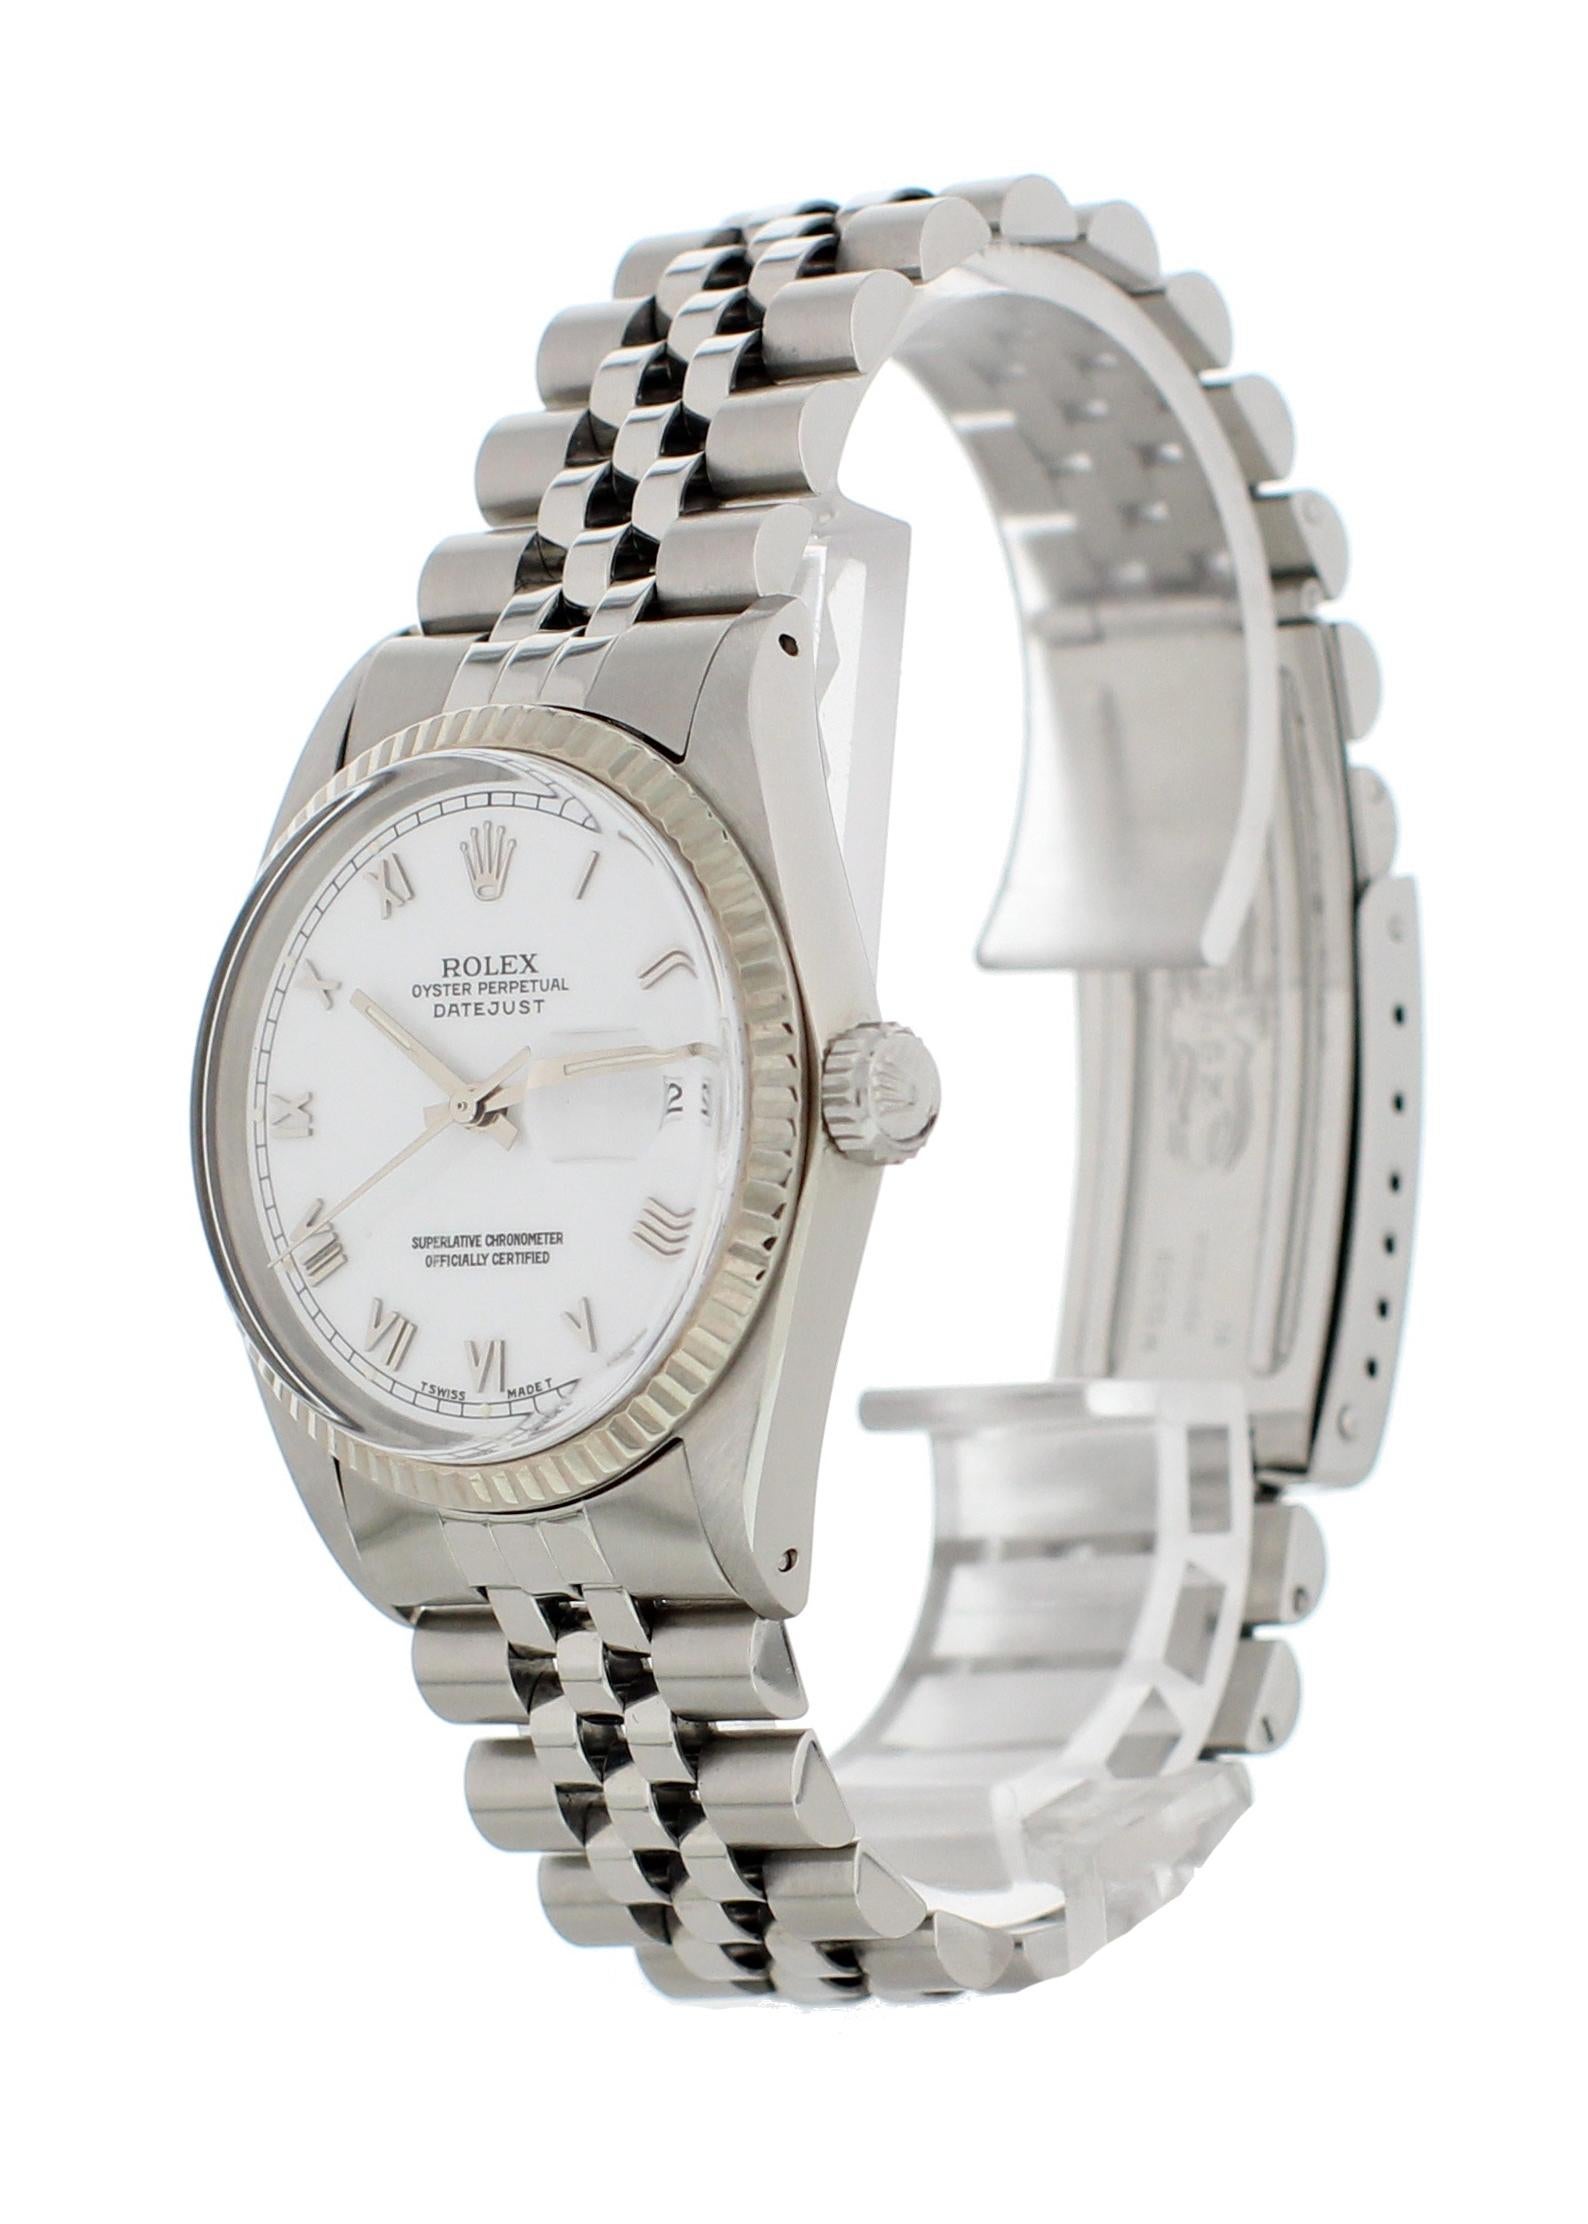 Rolex Oyster Perpetual Datejust 16014 Men's Watch. Stainless steel 36mm case. 18k white gold bezel. White dial with steel hands and Roman numeral markers. Date aperture with quickset function. Stainless steel jubilee band with fold over clasp. Will